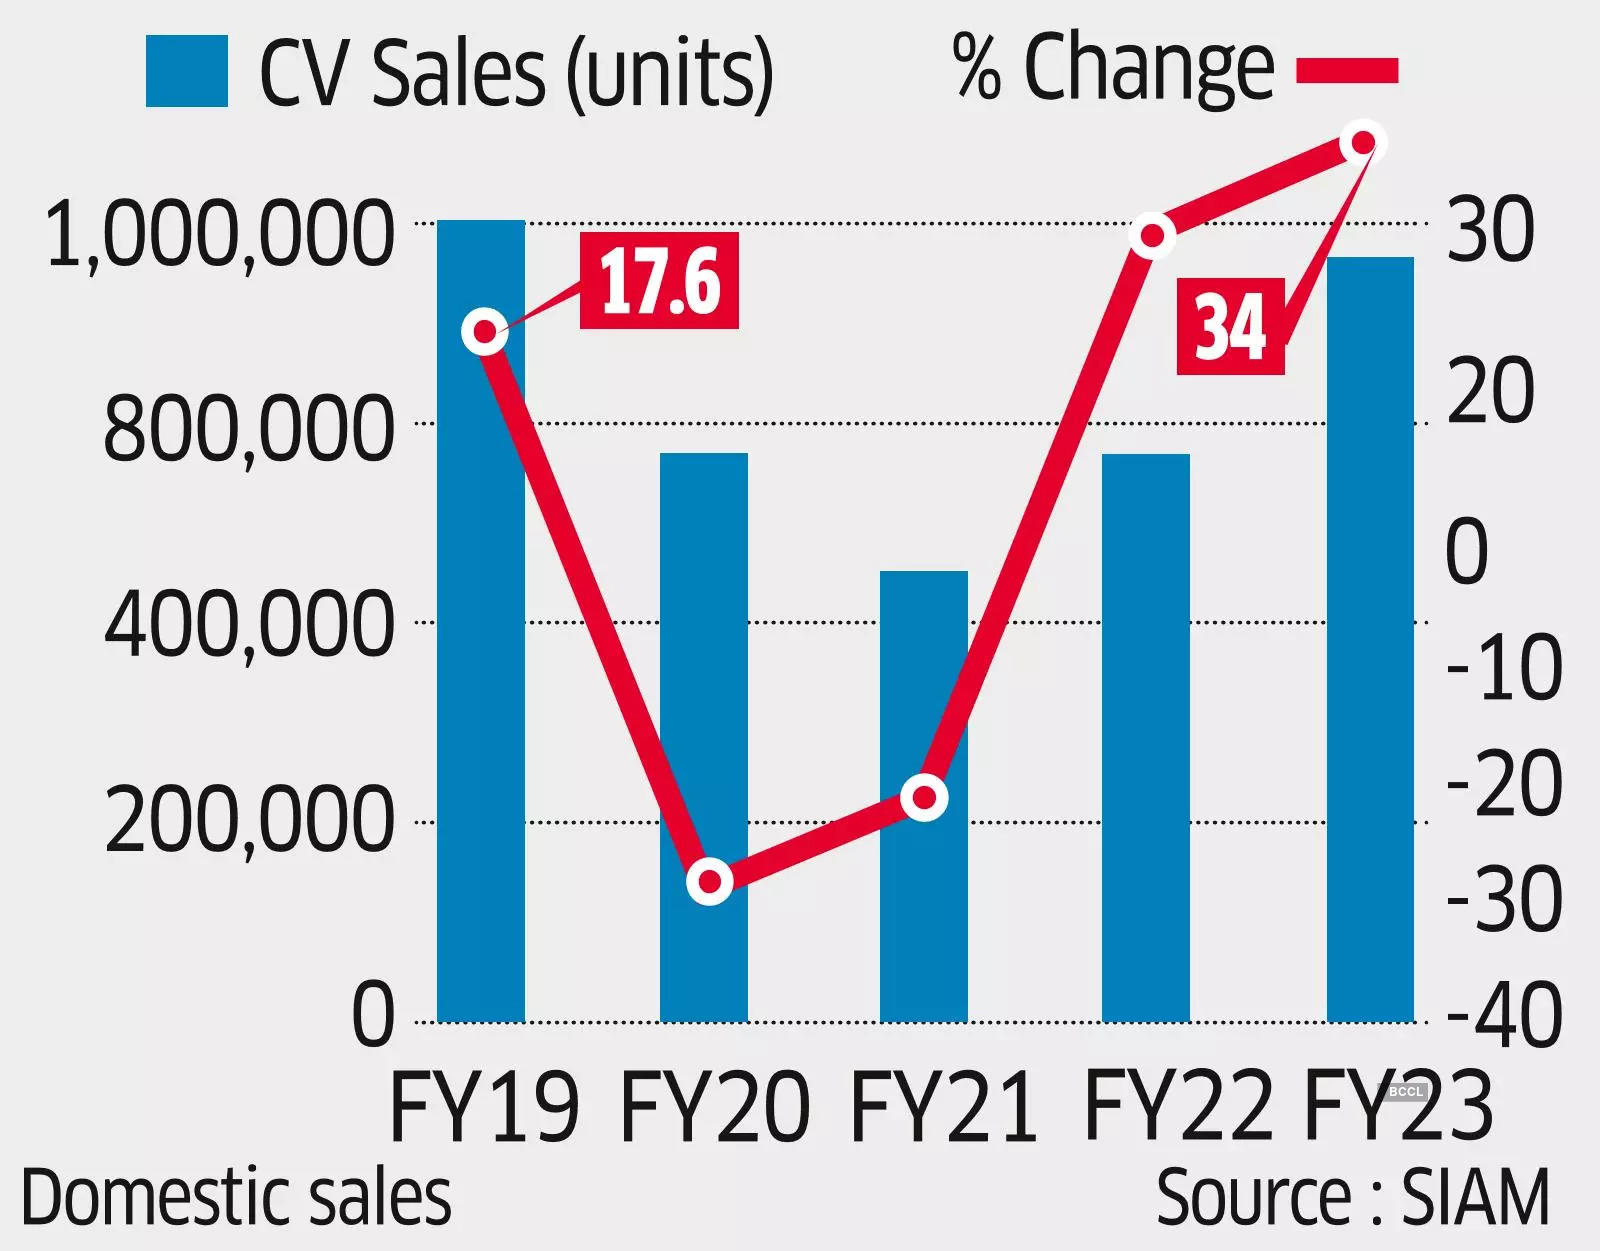 commercial vehicles, fy24 sales, vecv, costlier vehicles, freight movement, ve commercial vehicles, society of indian automobile manufacturers (siam), commercial vehicles set for heavy-duty fy24 sales, revenue expected to rise 30%